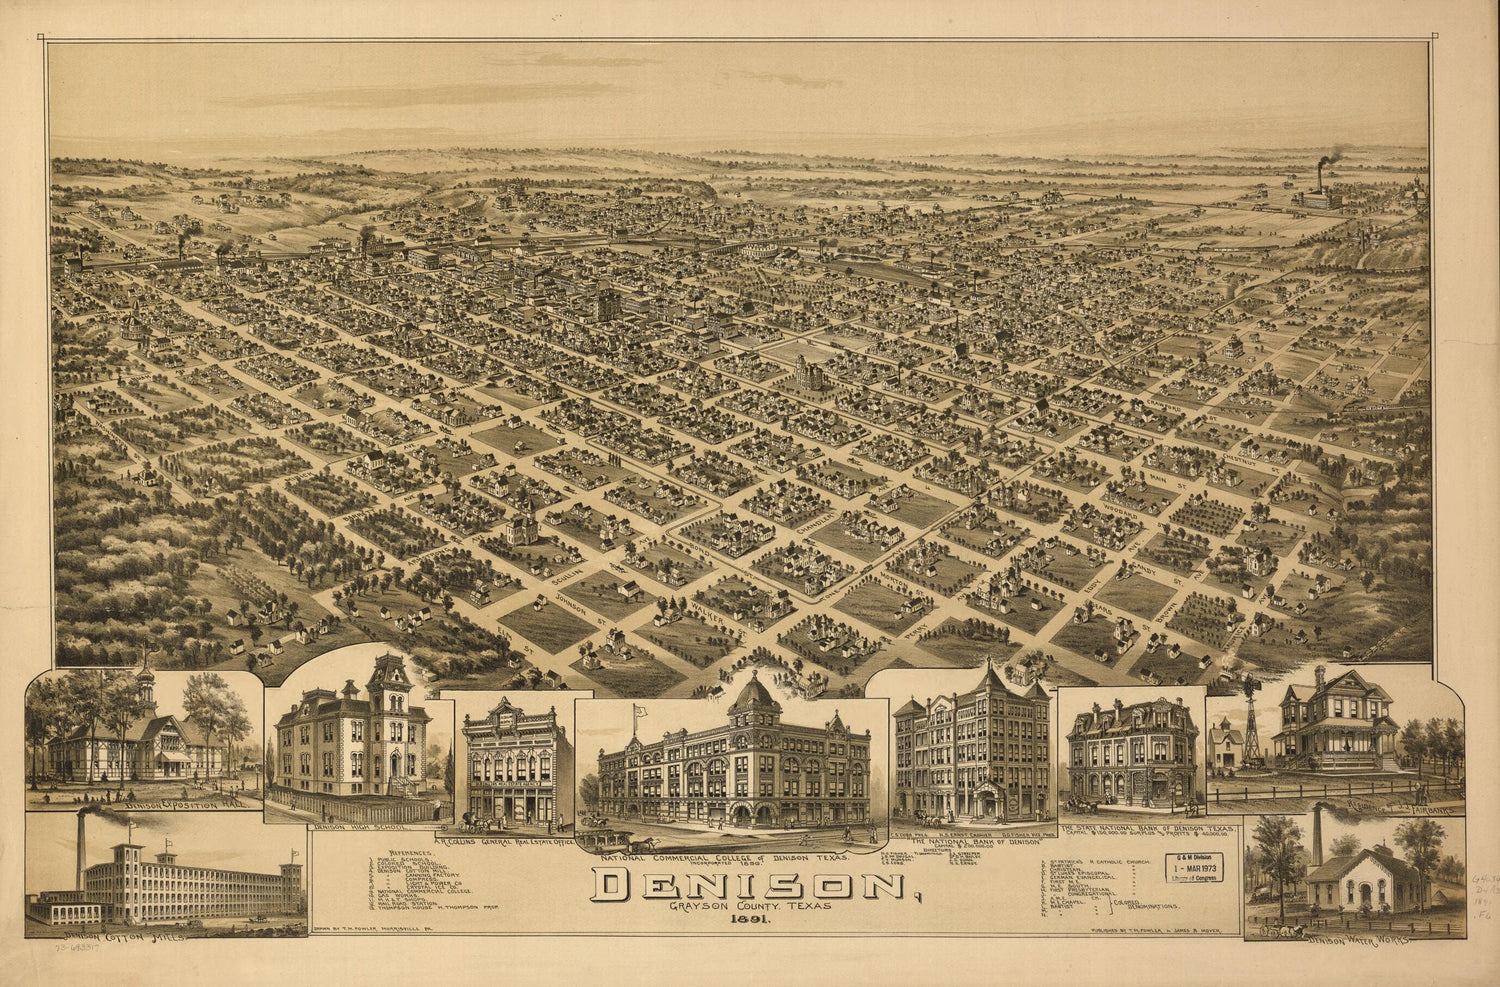 This old map of Denison, Grayson County, Texas from 1891 was created by T. M. (Thaddeus Mortimer) Fowler, James B. Moyer in 1891